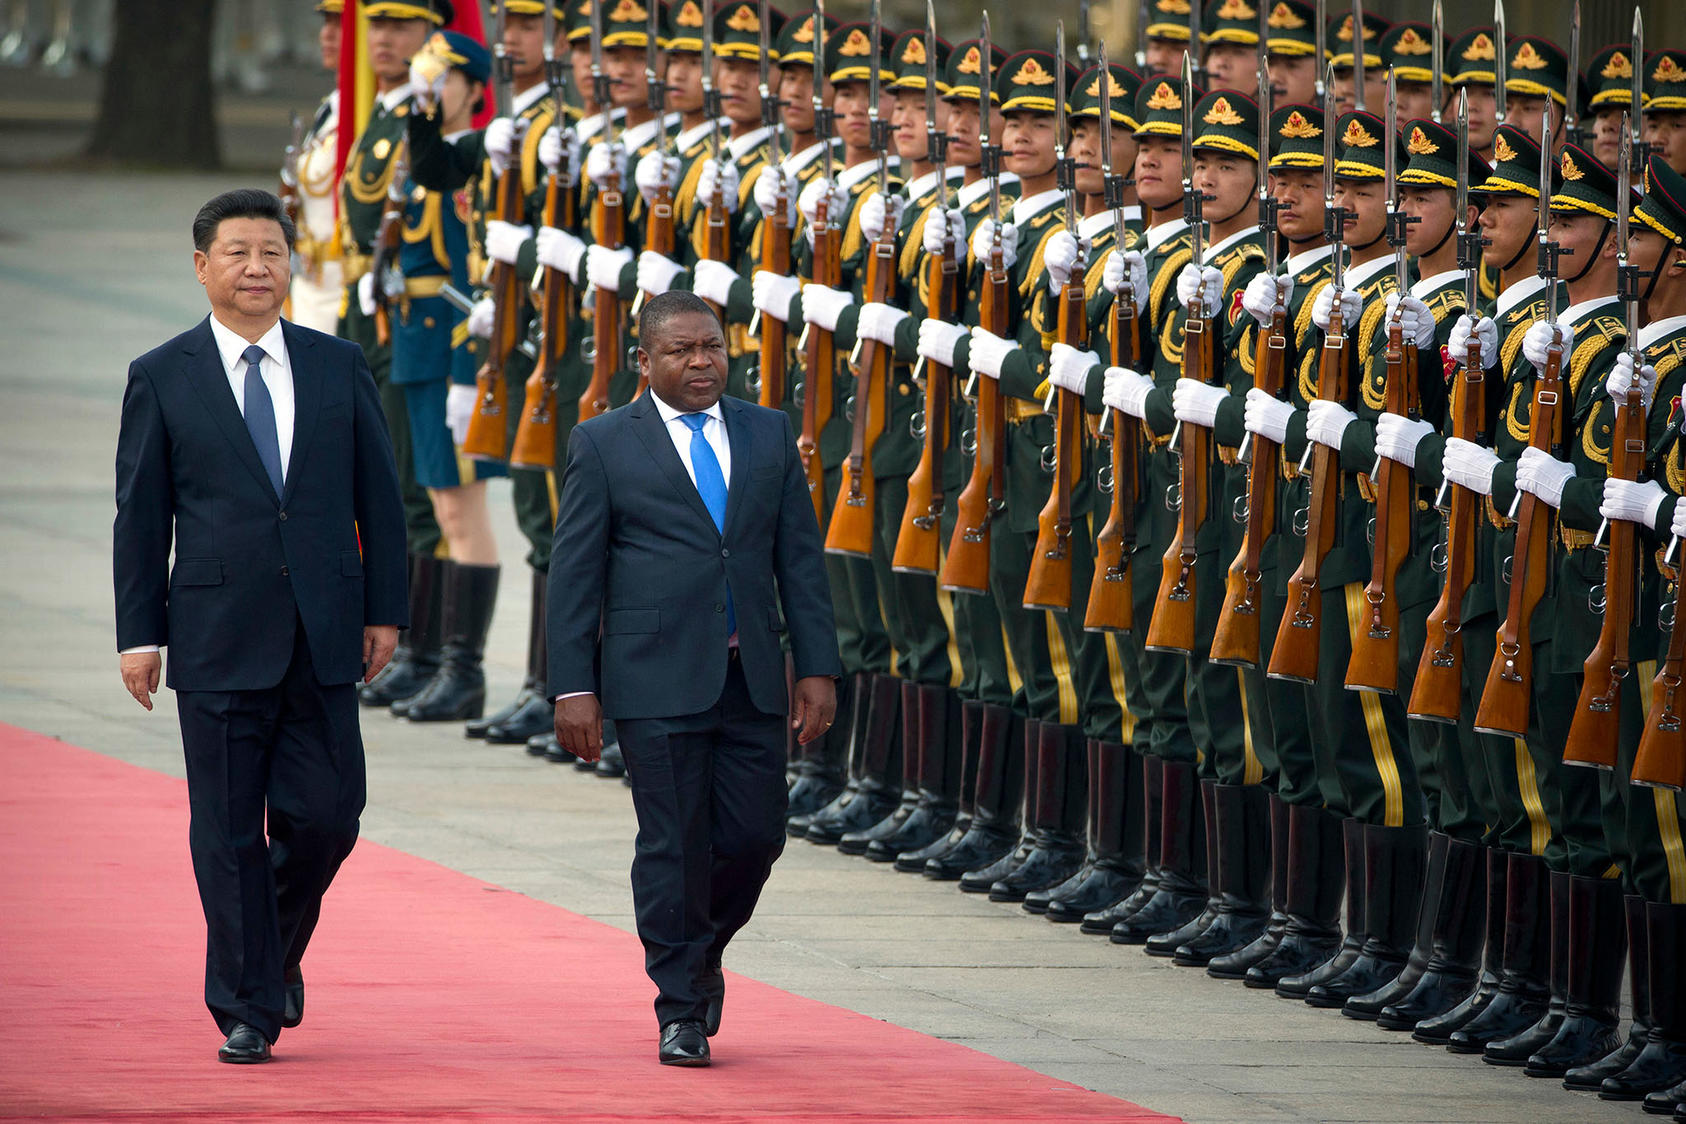 President Xi Jinping welcomes President Filipe Jacinto Nyusi of Mozambique to Beijing on May 18, 2016. (Photo by Mark Schiefelbein/AP)